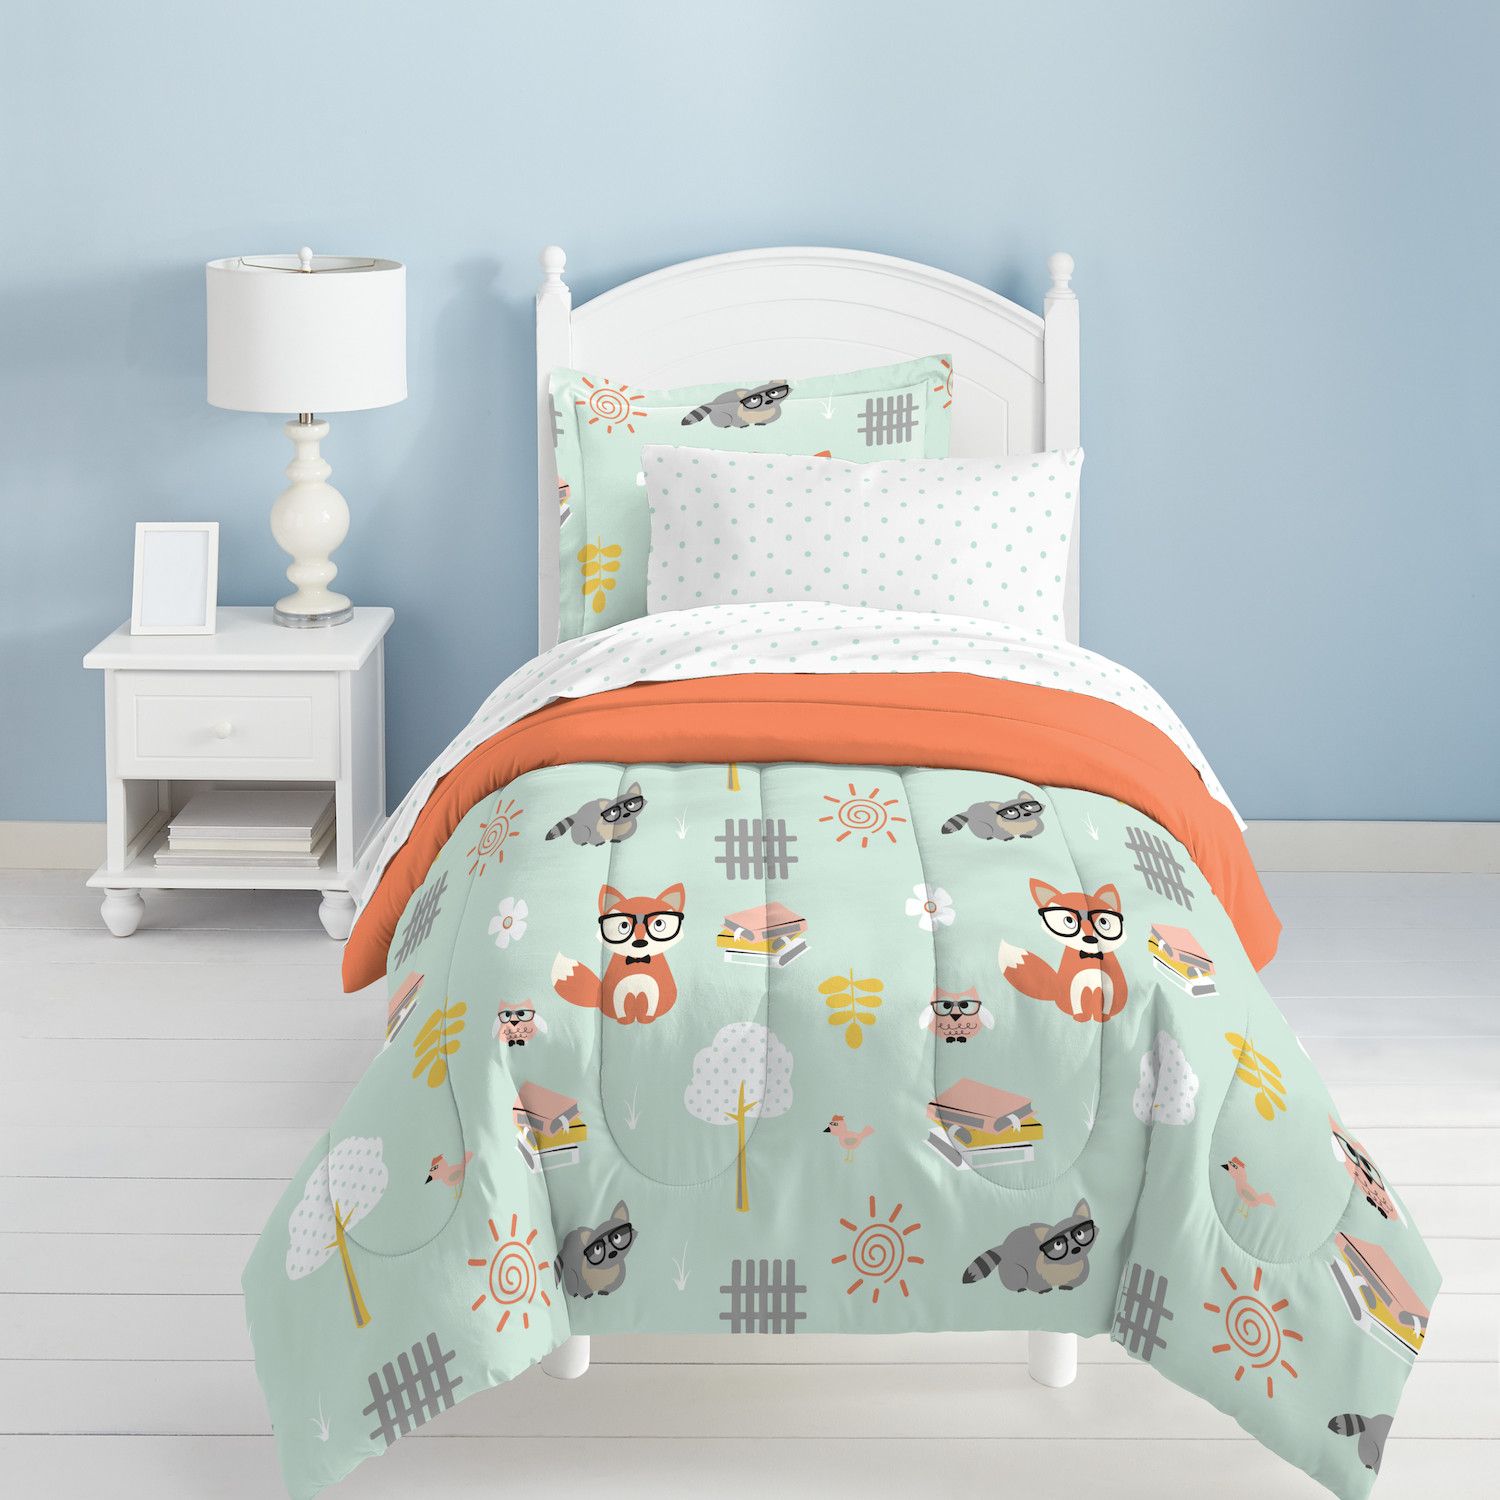 Image for Dream Factory Woodland Friends 5-piece Twin Bed Set at Kohl's.